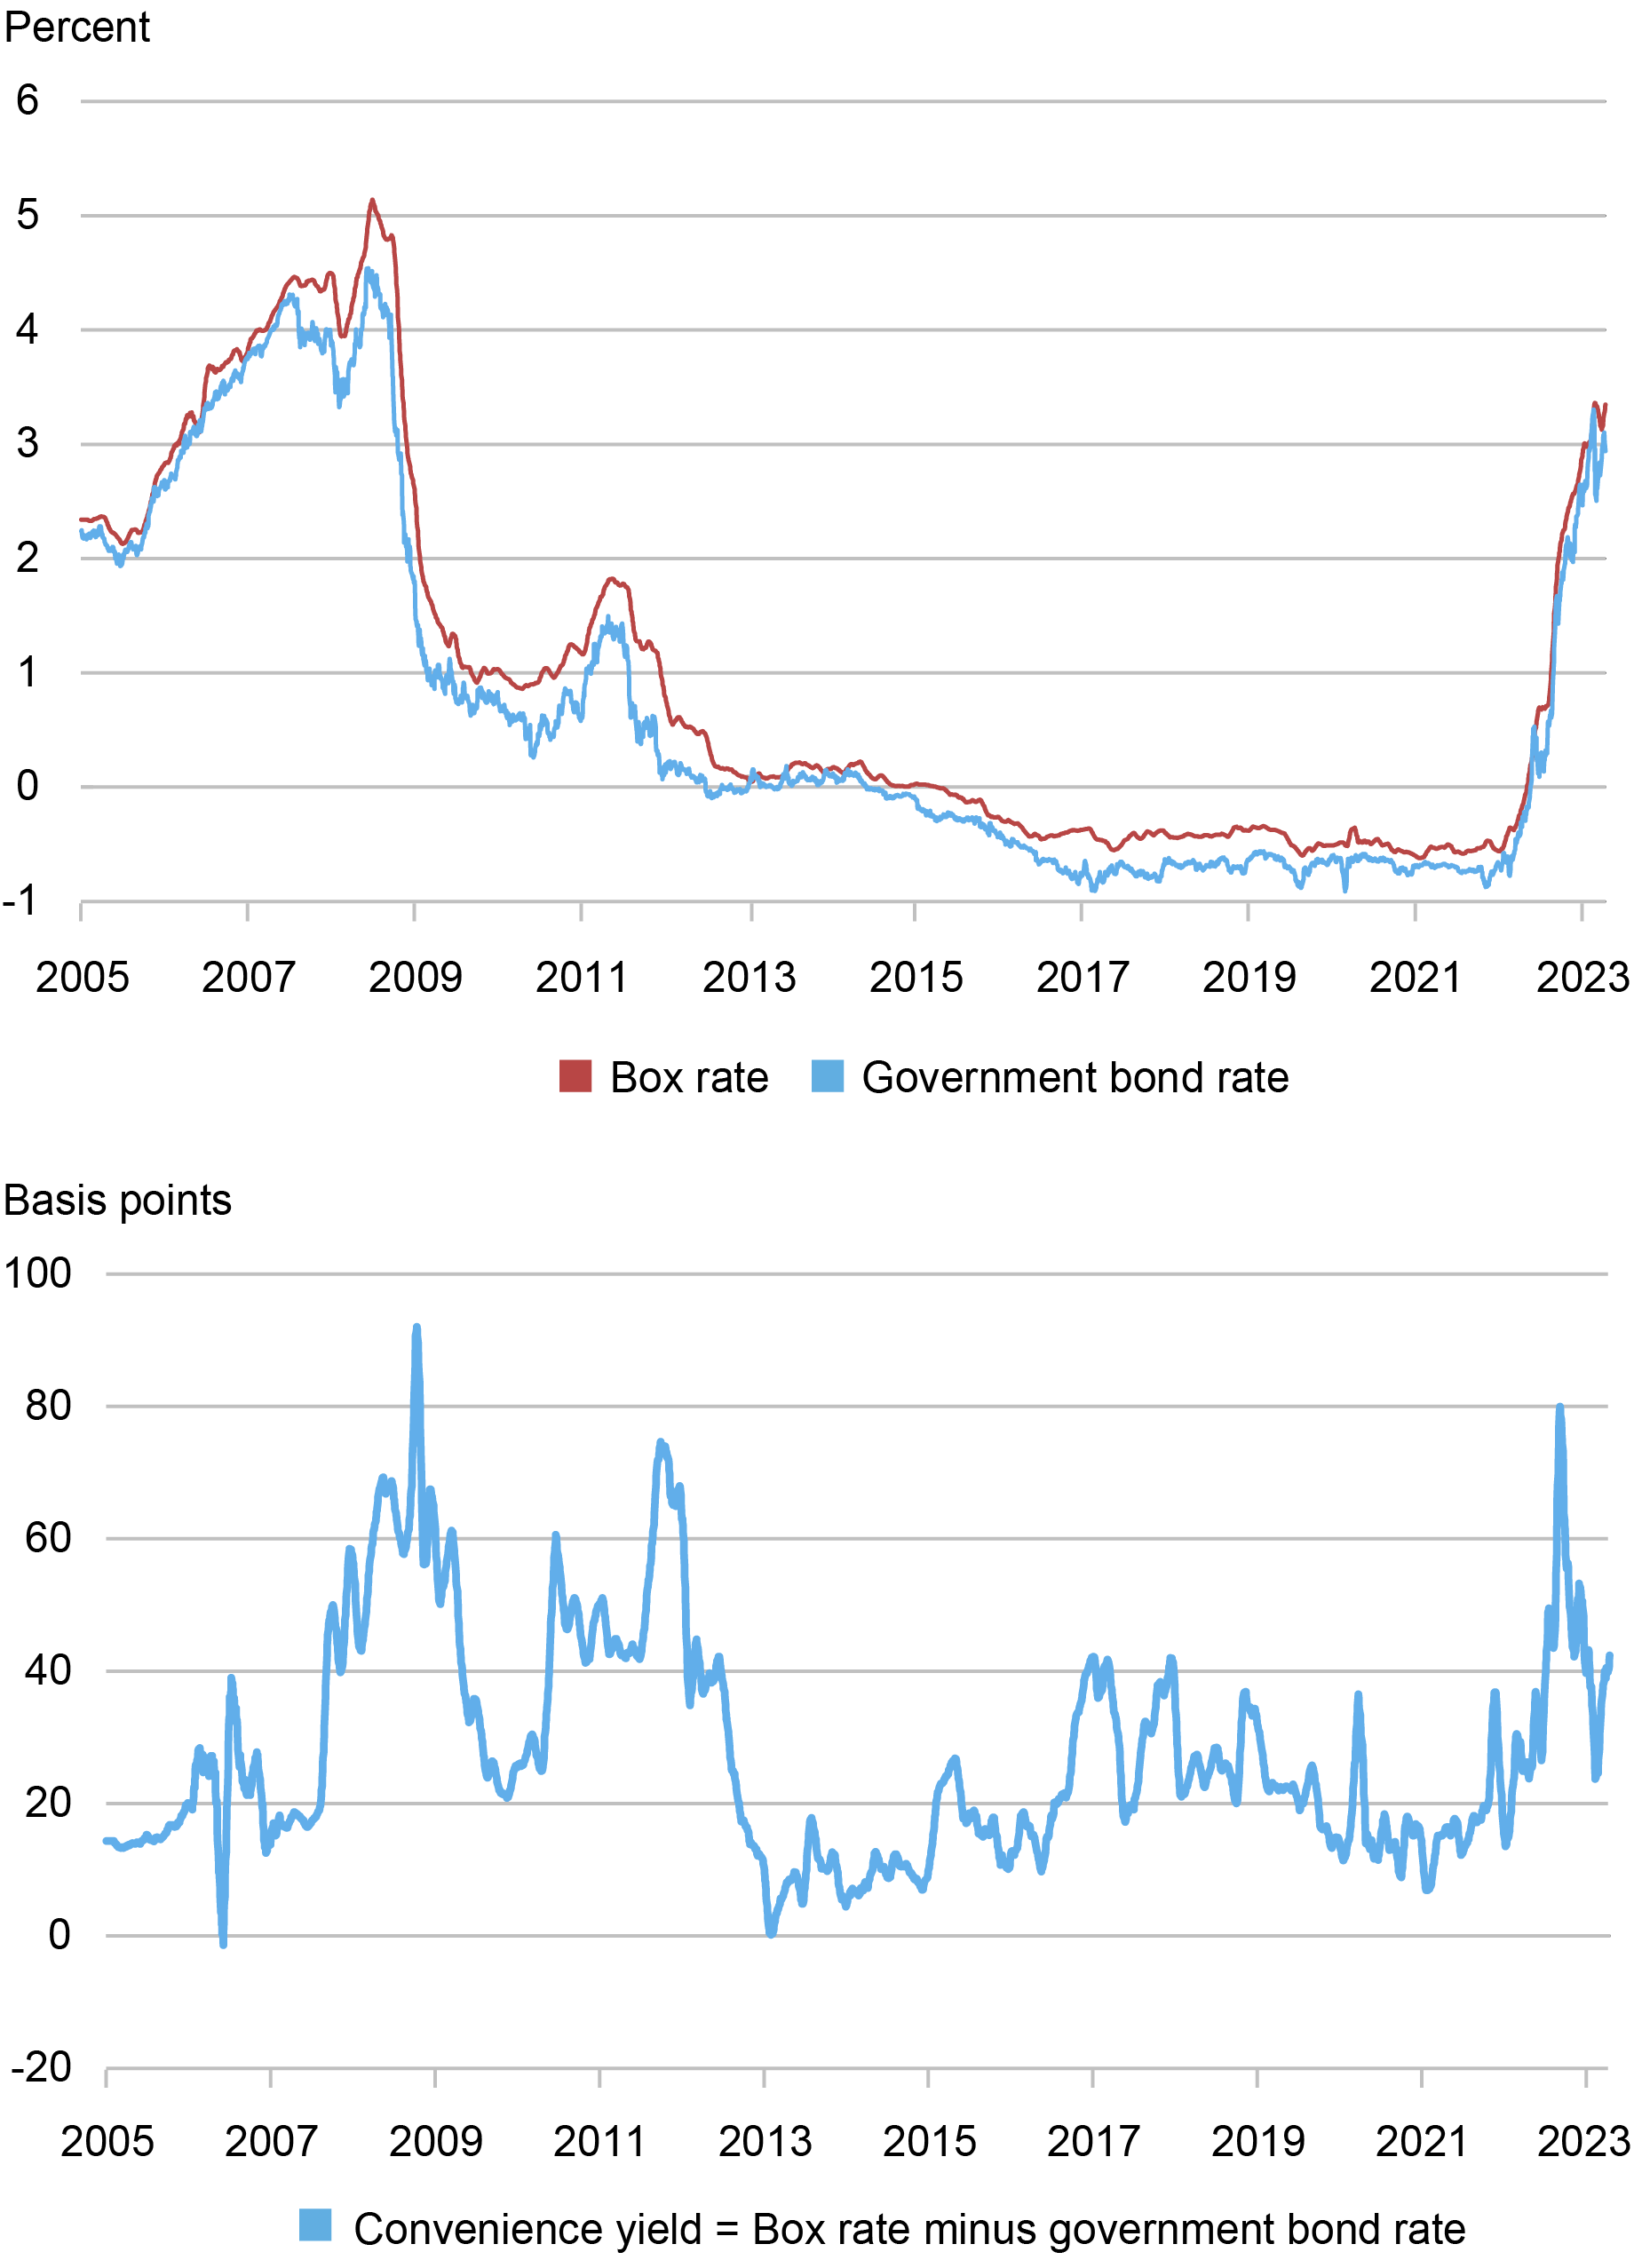 Two-panel Liberty Street Economics line chart plotting the 1-year box and government bond rate (in percentage terms, top chart) and convenience yield estimate (in basis points, bottom chart) from January 2005 through April 2023 as a 21-day moving average across trading days.